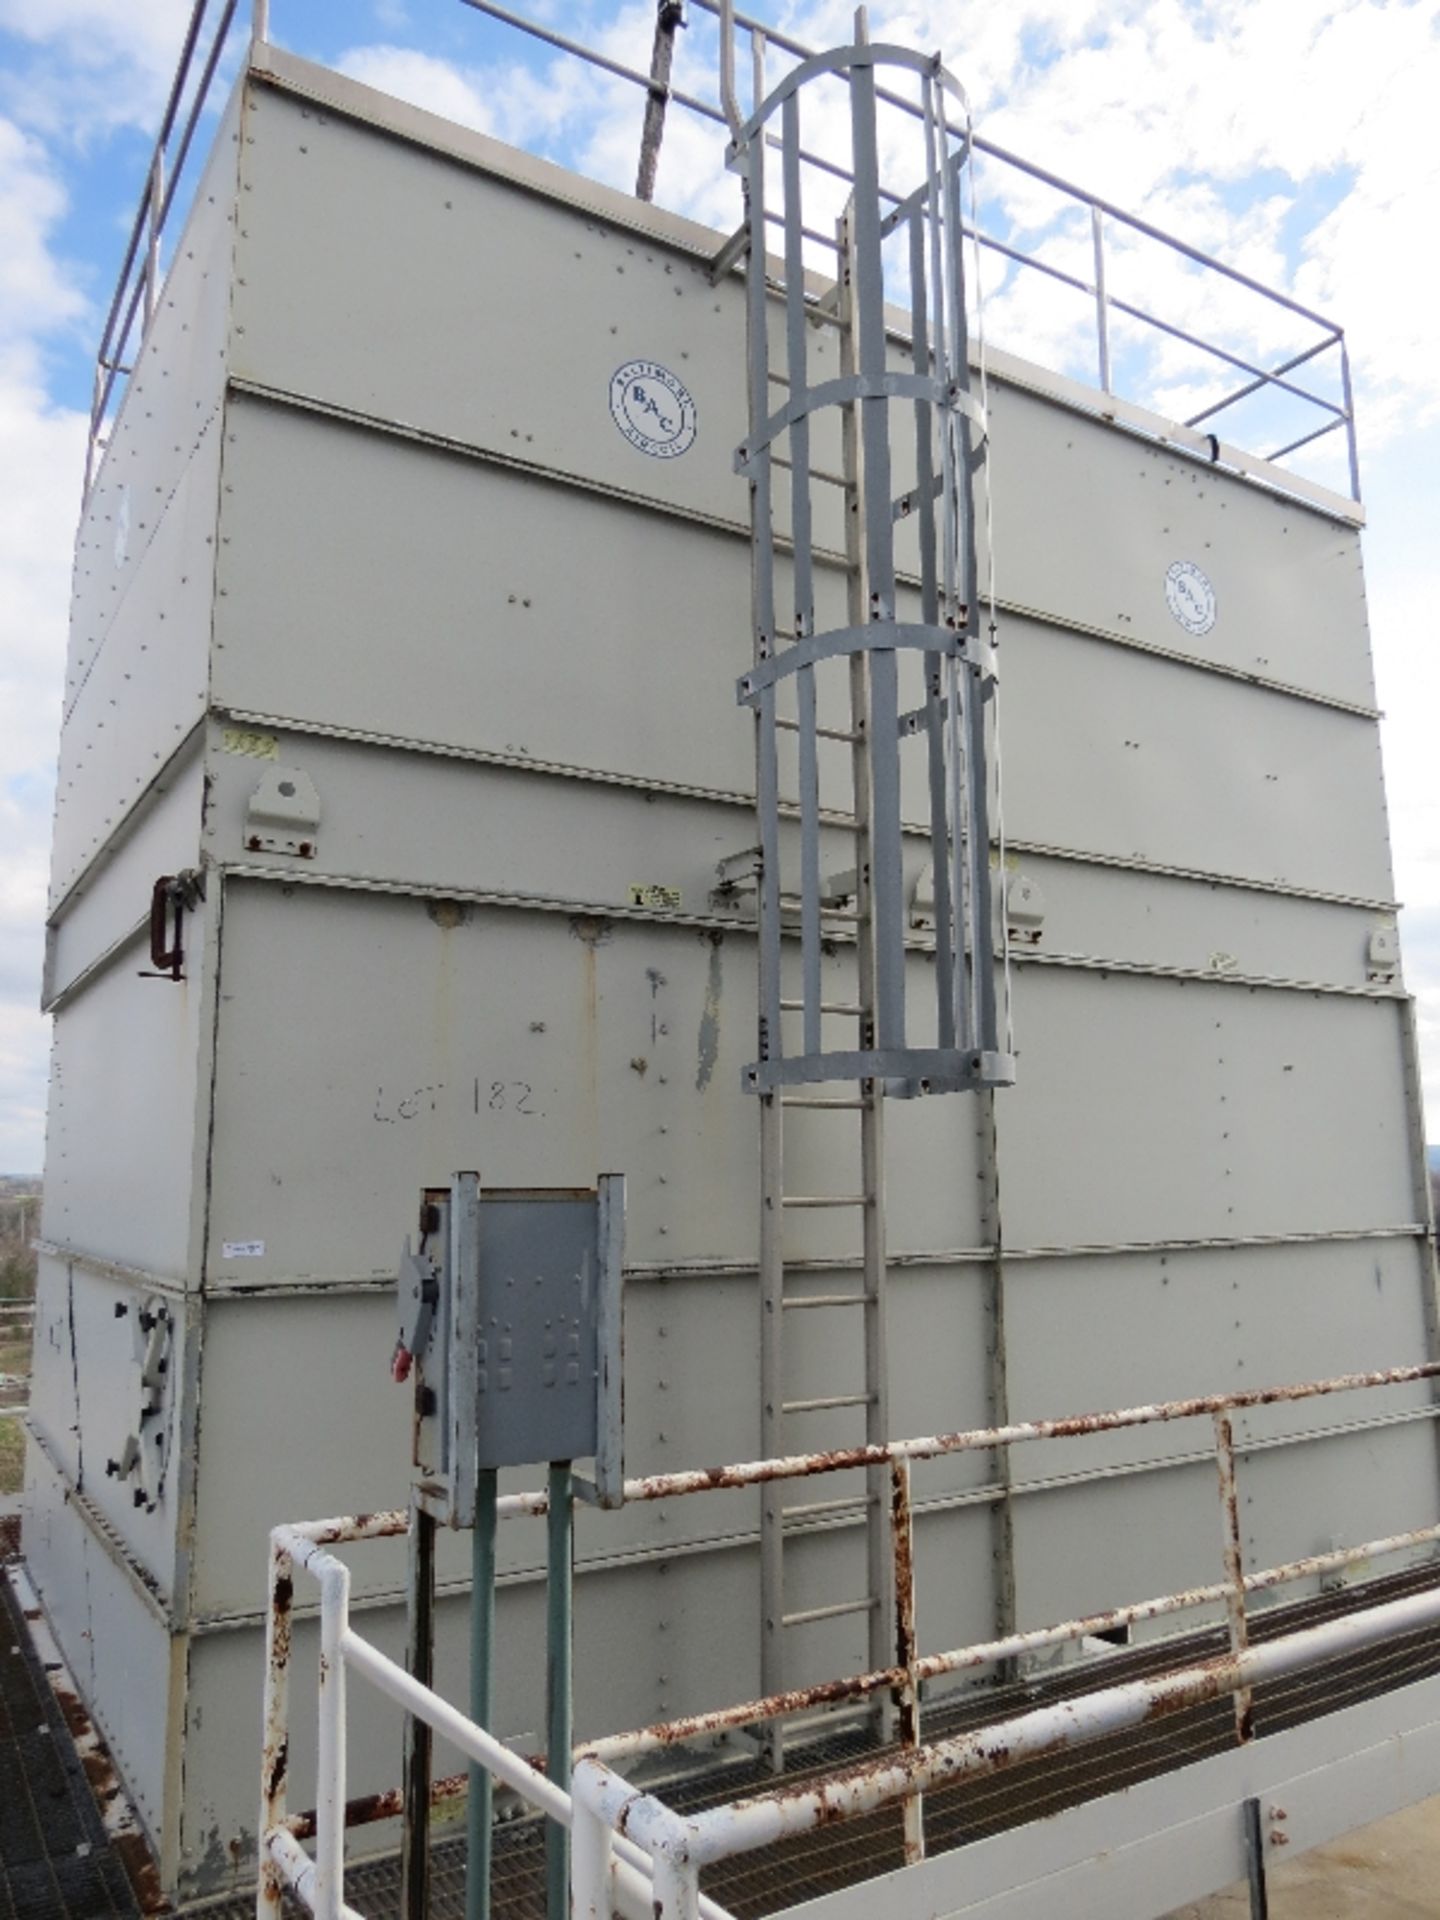 Baltimore Air Coil Cooling Tower, Model VT1-600-PPCX, Serial Number 96800171 Belt #B142 Nominal - Image 3 of 6